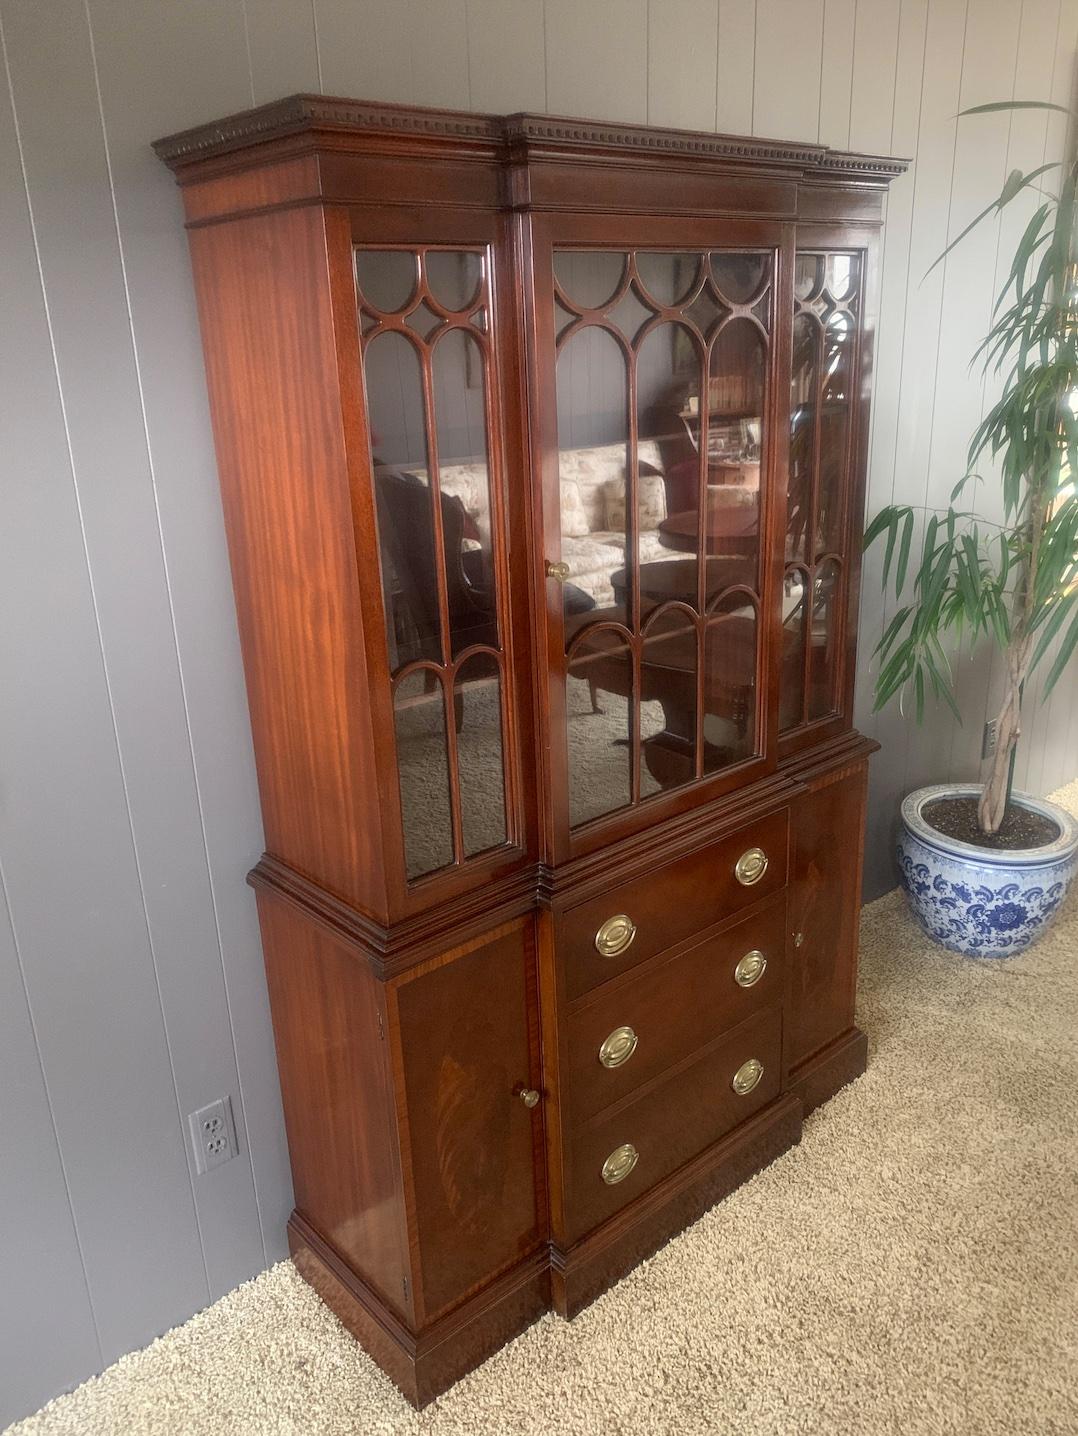 An exceptional antique Georgian style breakfront china cabinet or bookcase

USA, early 20th century

Flame mahogany, with glass front doors, and original brass hardware.

Measures: 44.5